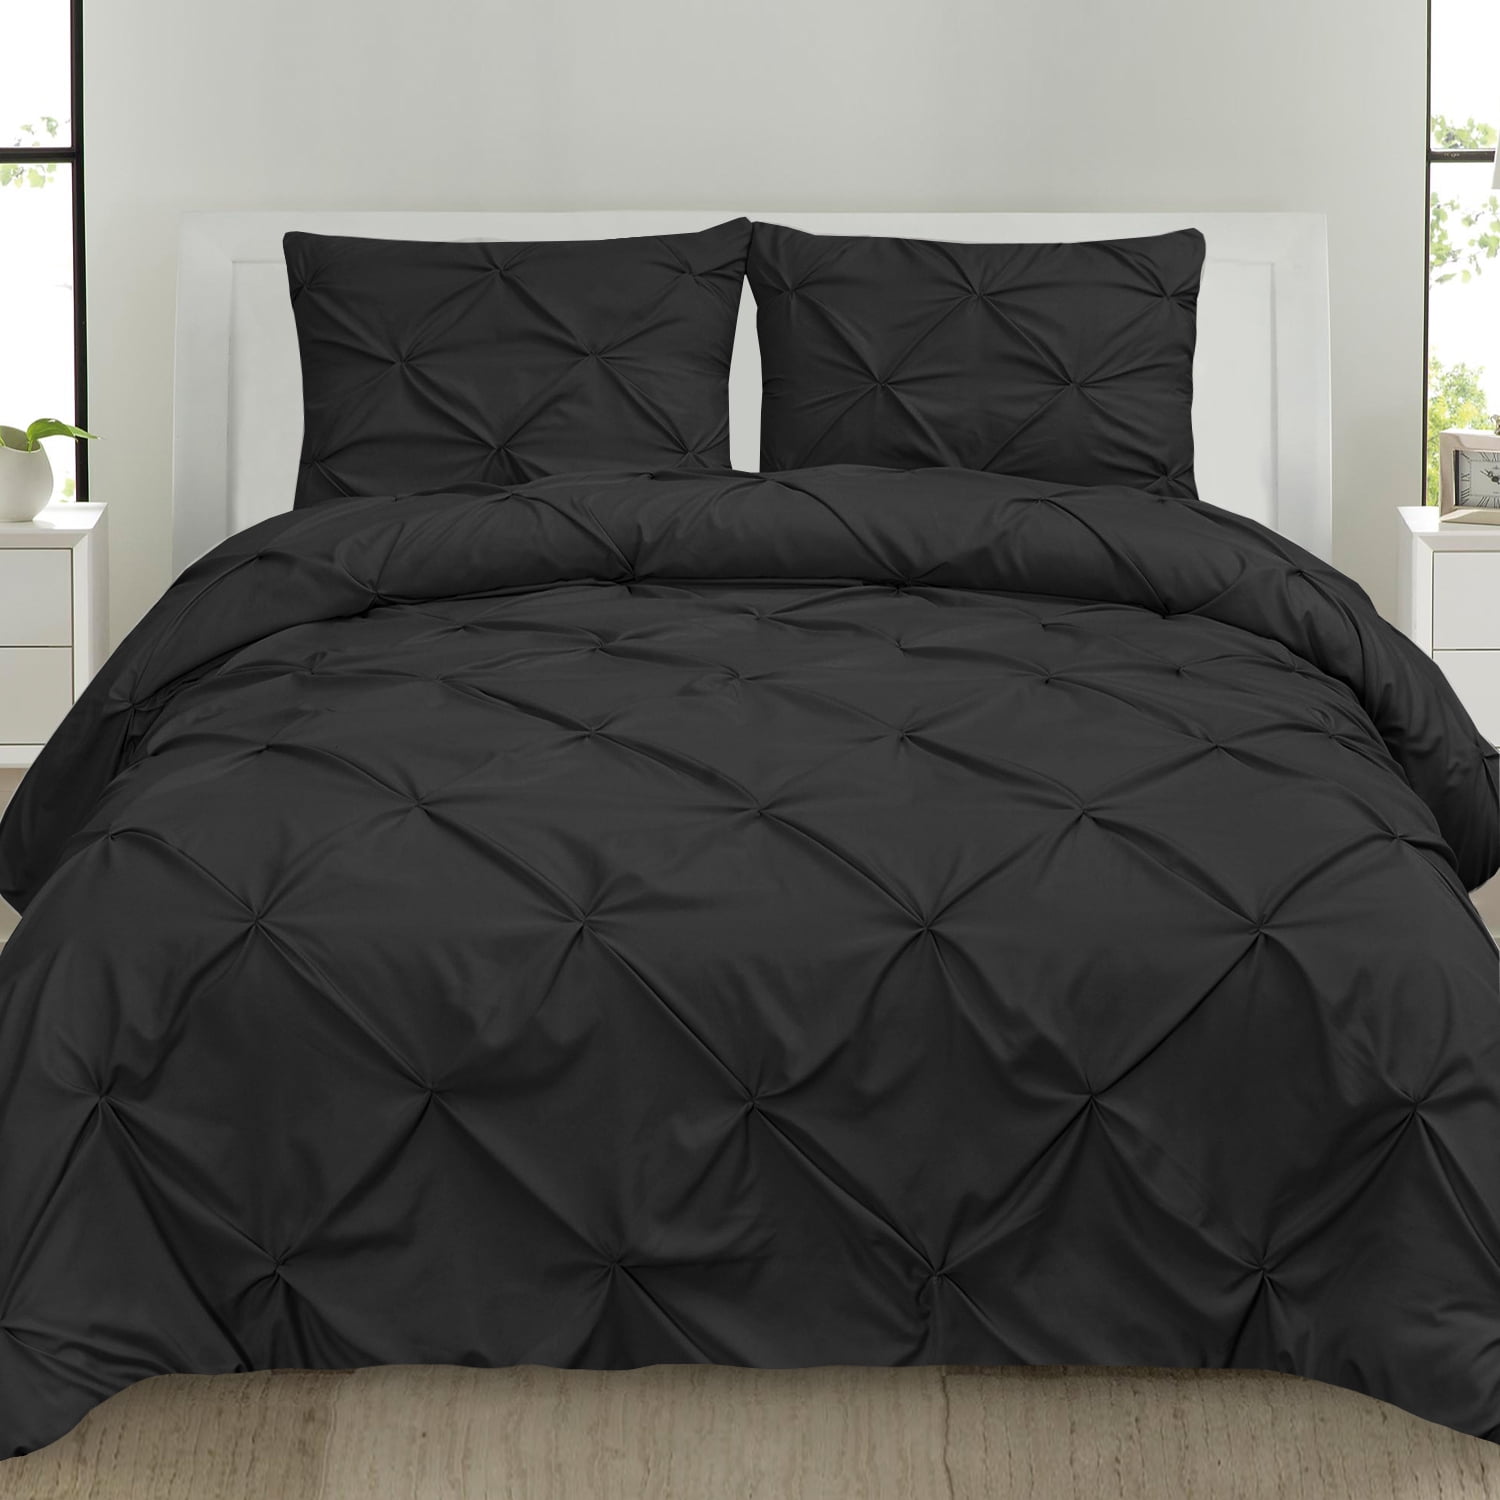 Black, Full/Queen Pintuck Pinch Pleat Pattern Bedding Comforter Cover Set 3 Piece Pinch Pleated Duvet Cover with Zipper Closure